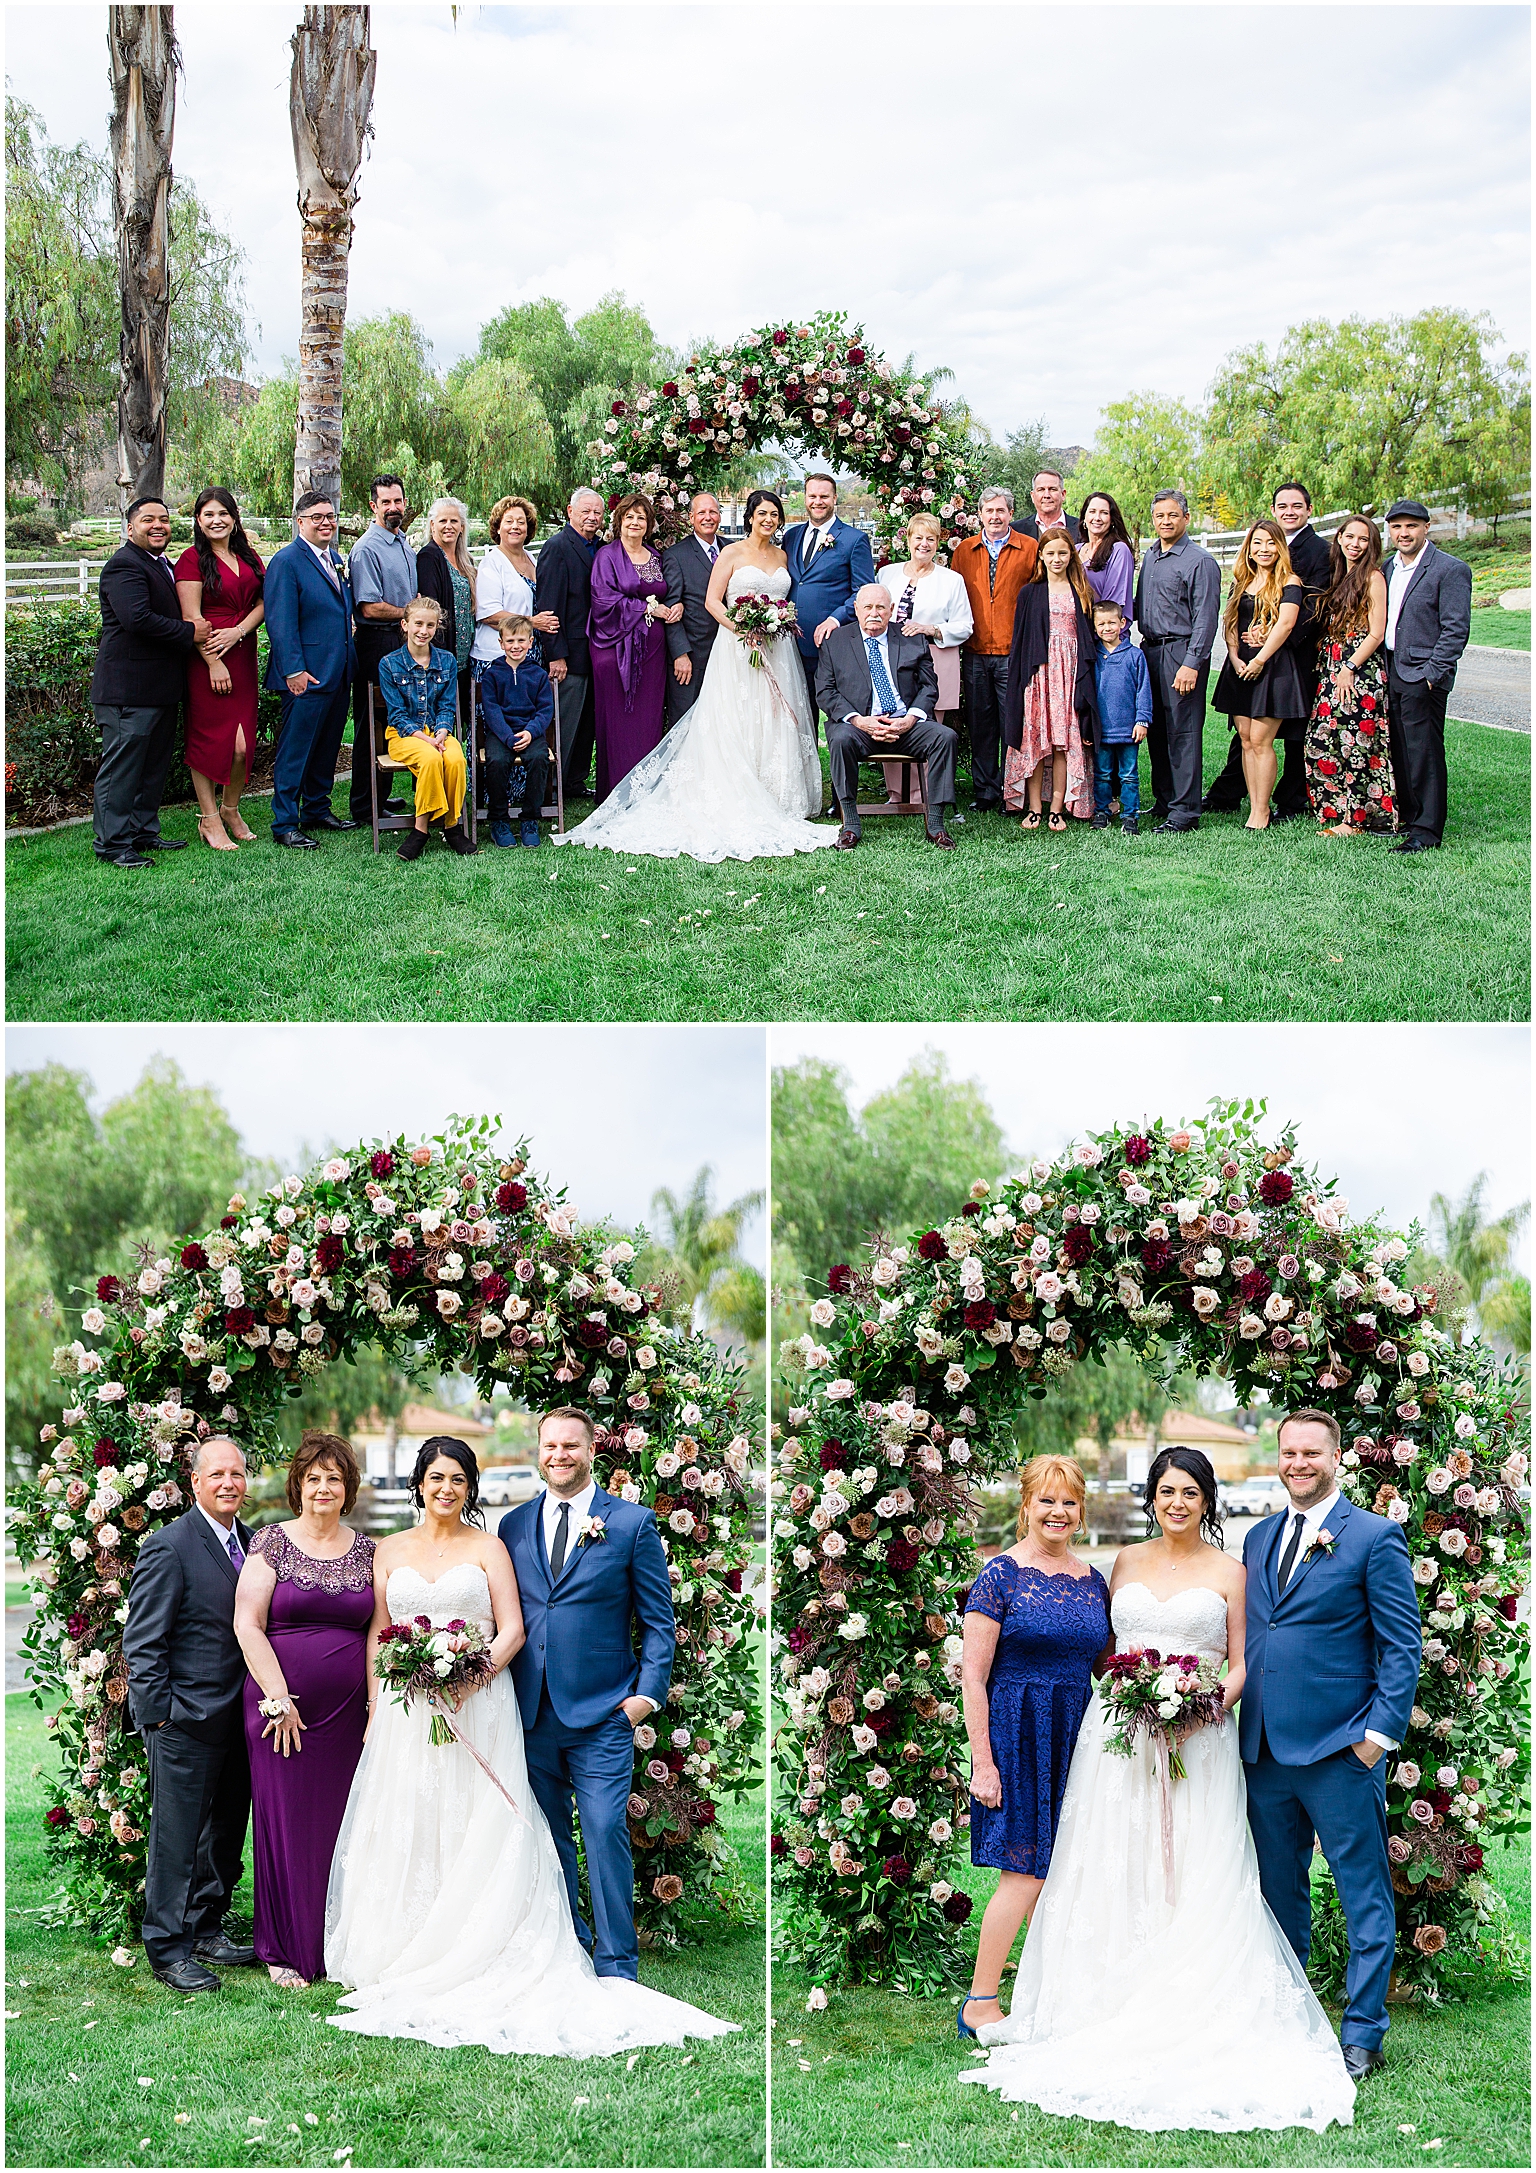 large family formals in front of the wedding floral arch